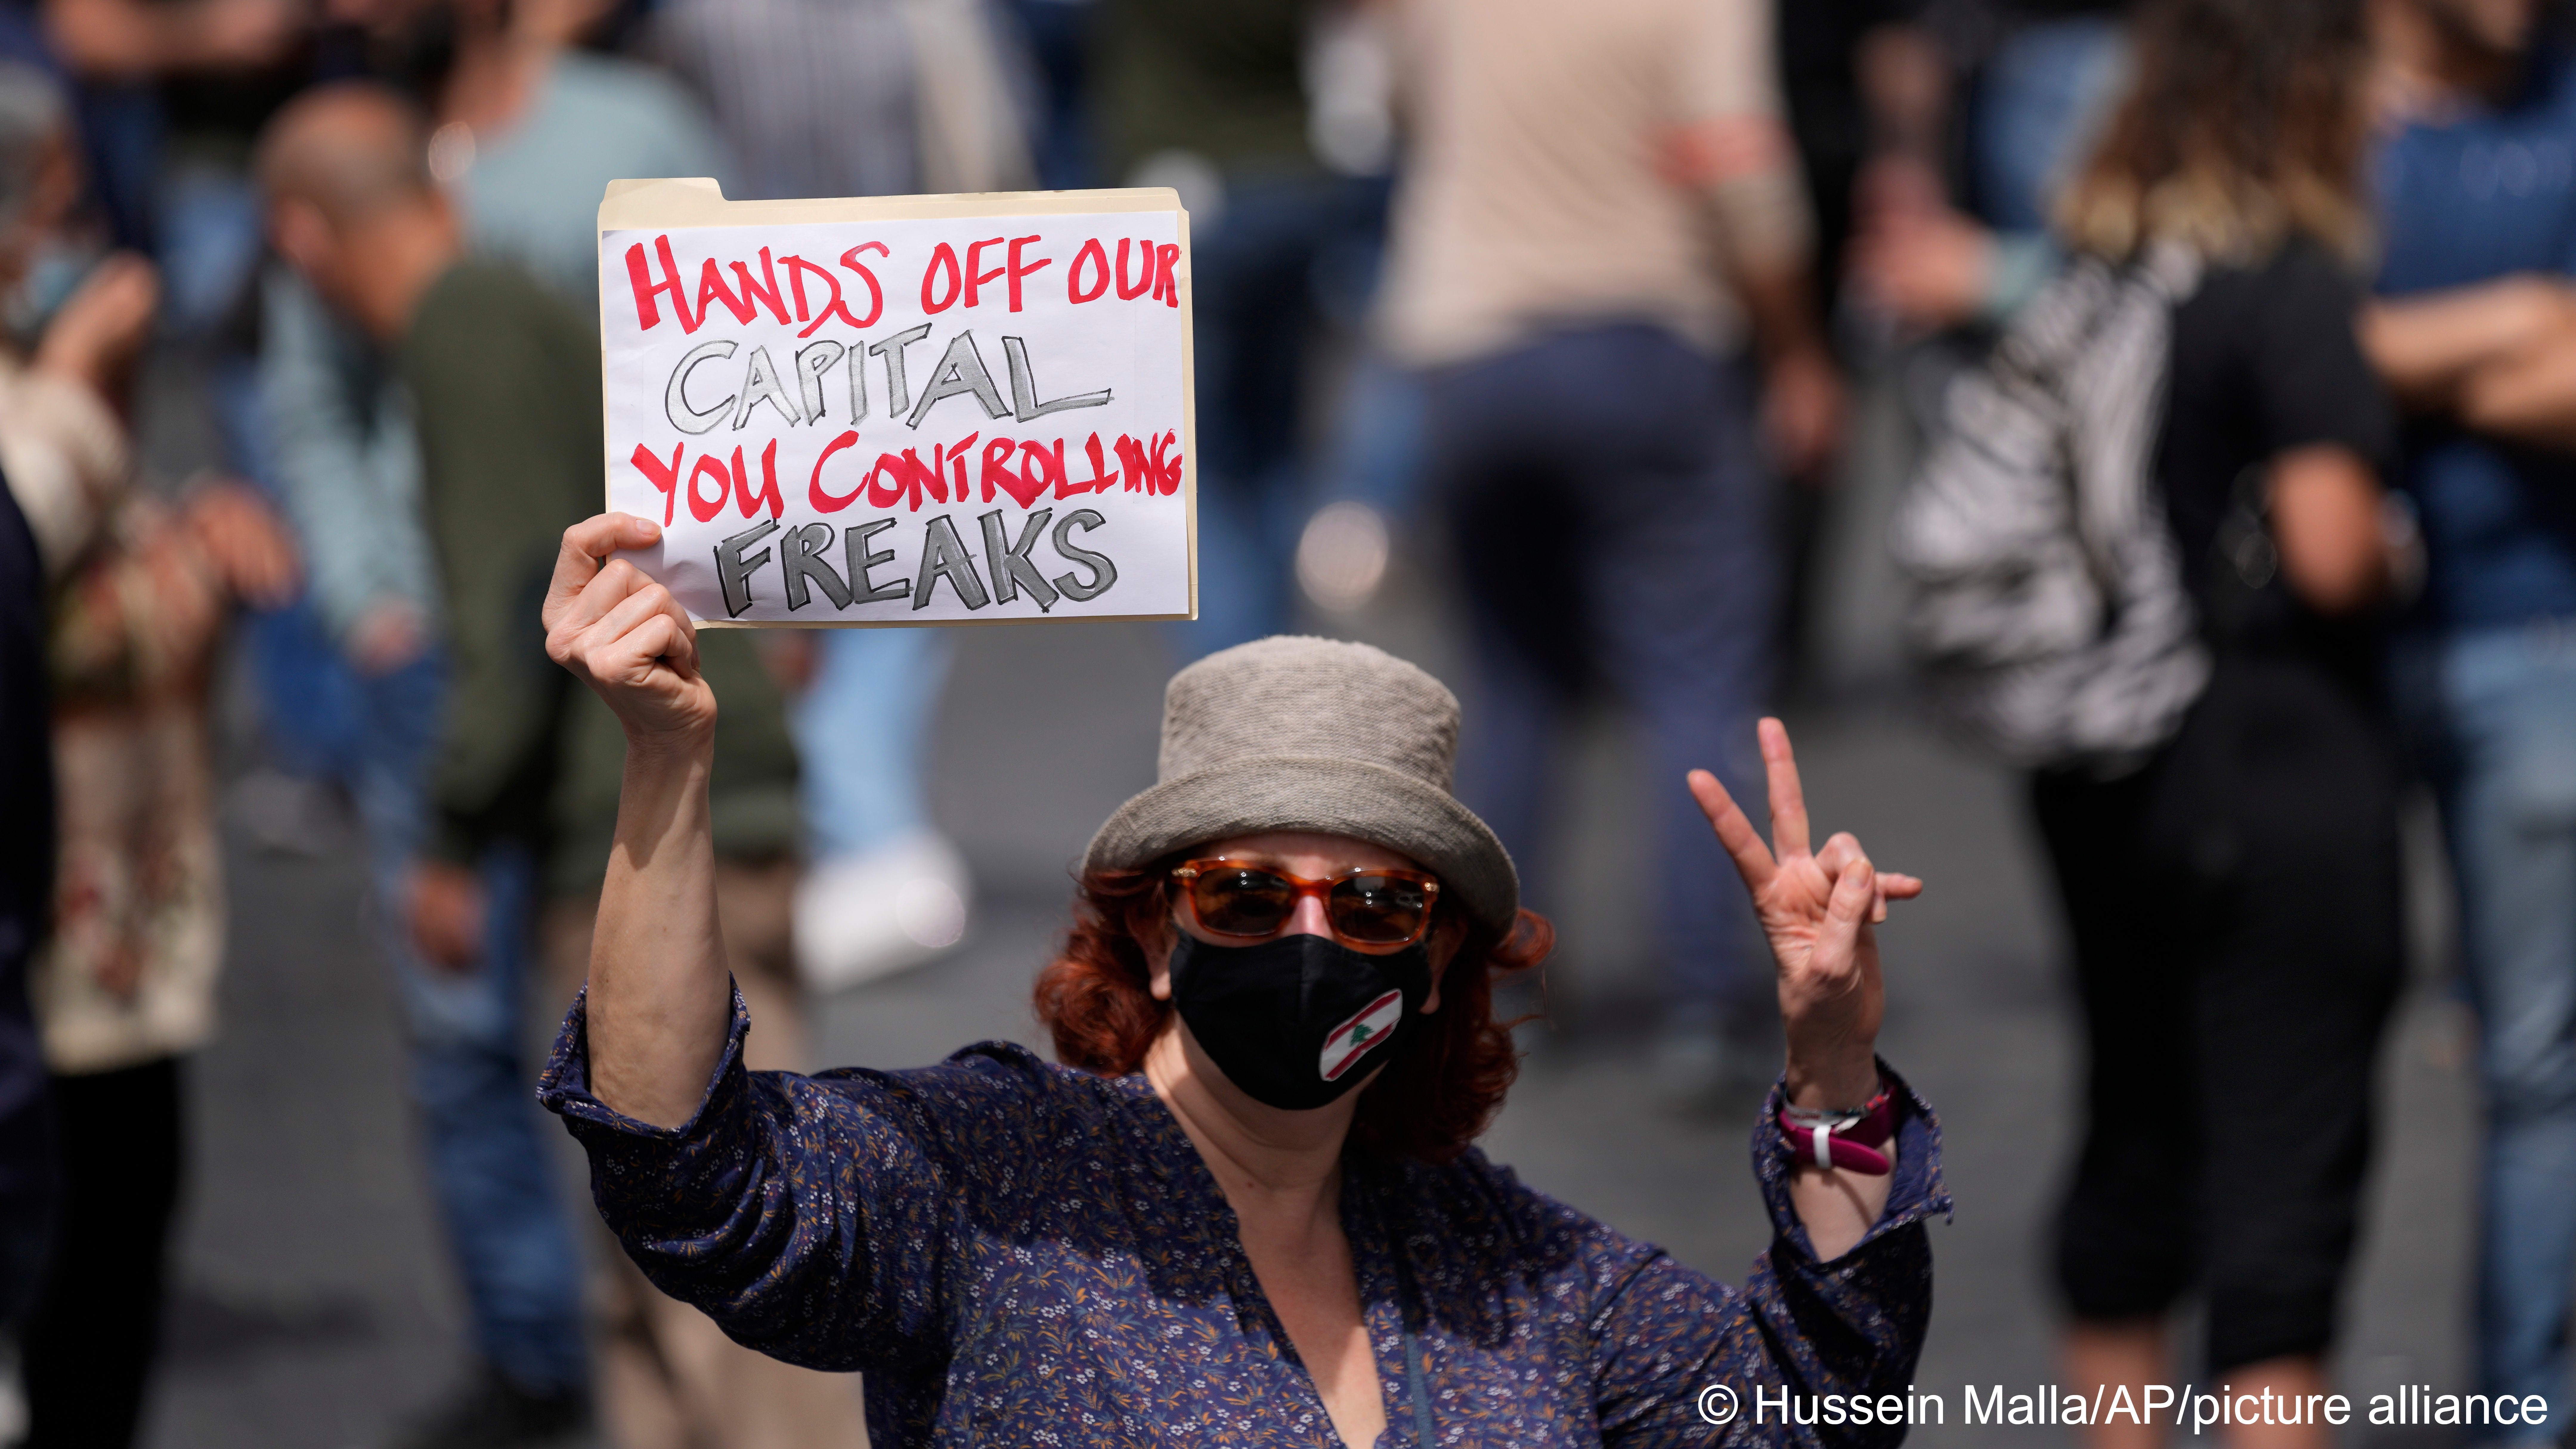 A demonstrator holds a placard during a protest against a new draft law on capital controls on savings withdrawals outside the parliament building, in downtown Beirut, Lebanon, Tuesday, April 26, 2022 (photo: AP Photo/Hussein Malla)